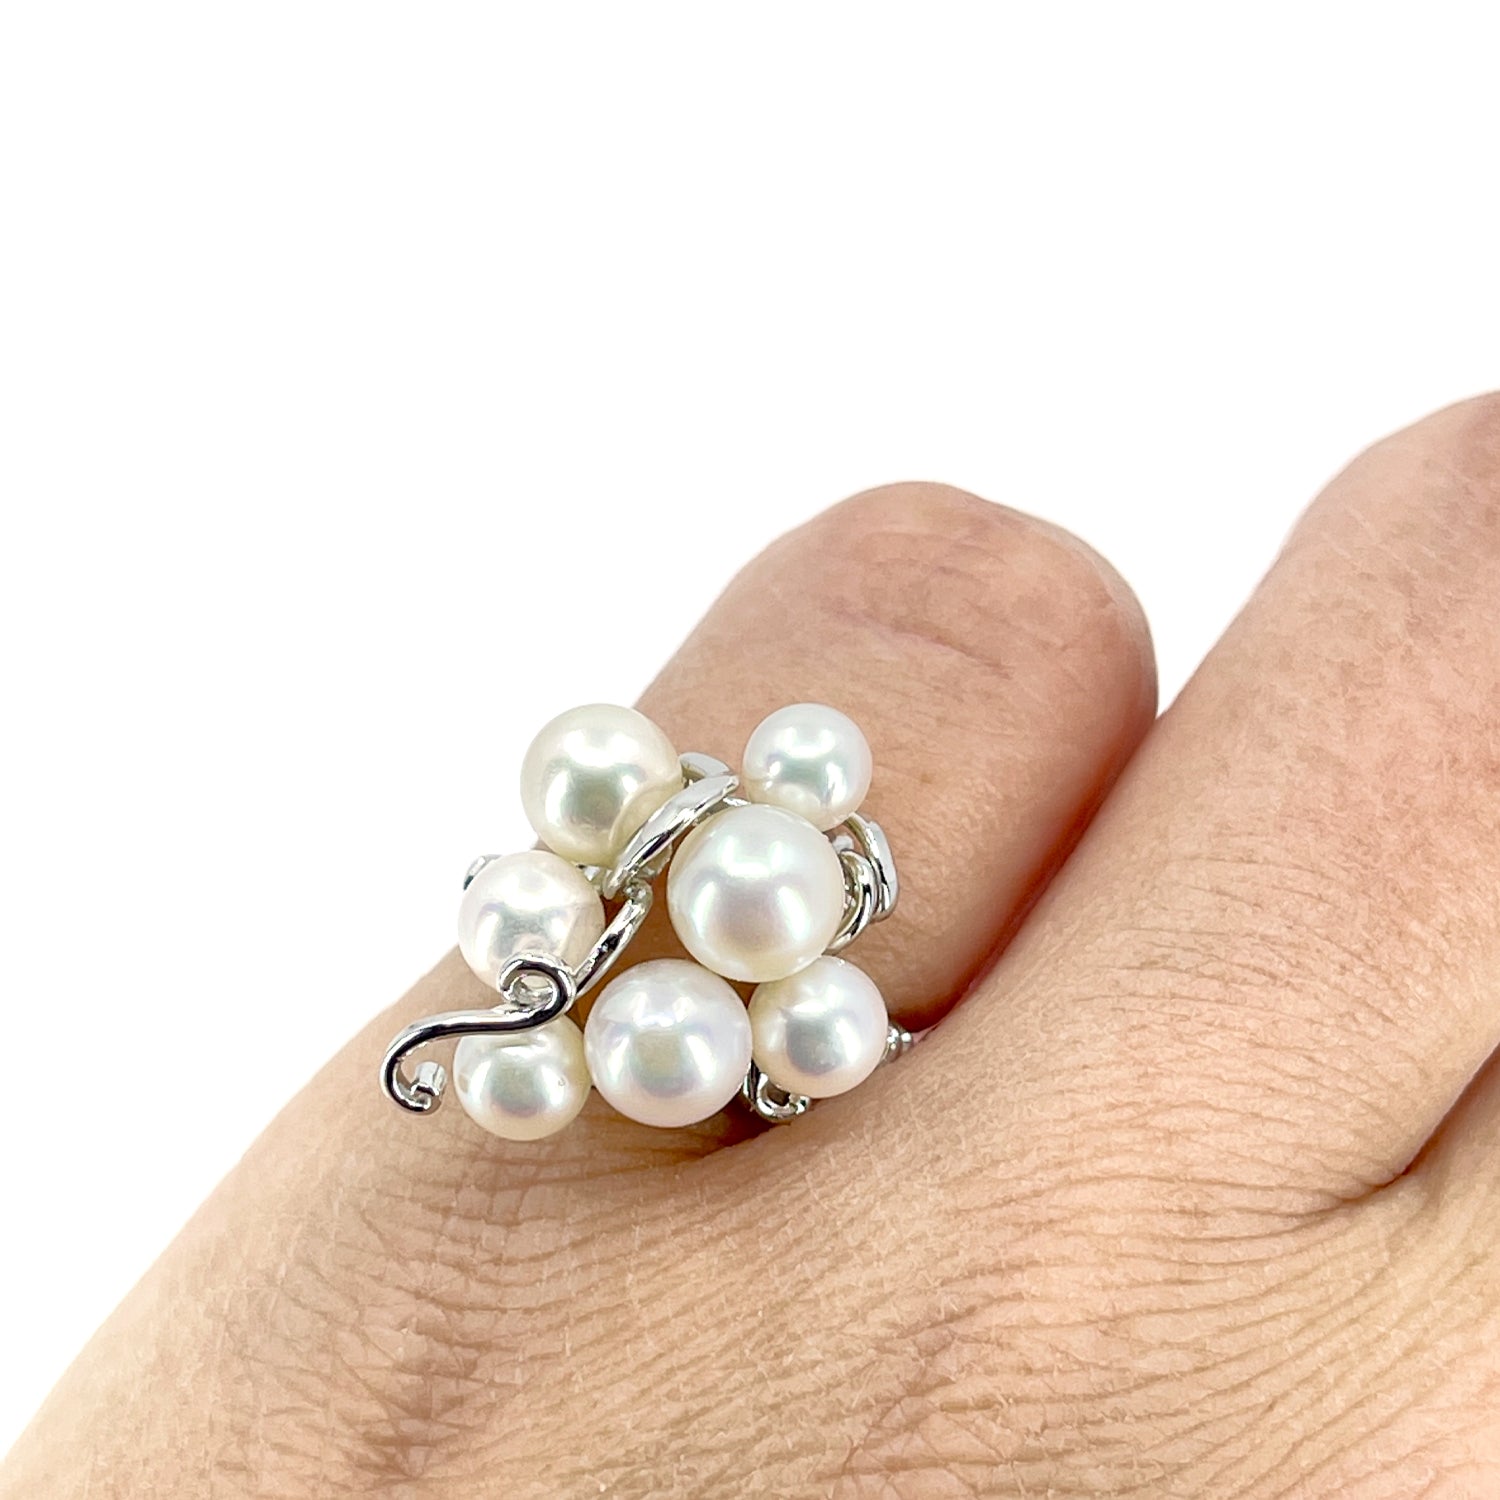 Cluster Mid Century Japanese Saltwater Akoya Cultured Pearl Ring- Sterling Silver Sz 5 1/2